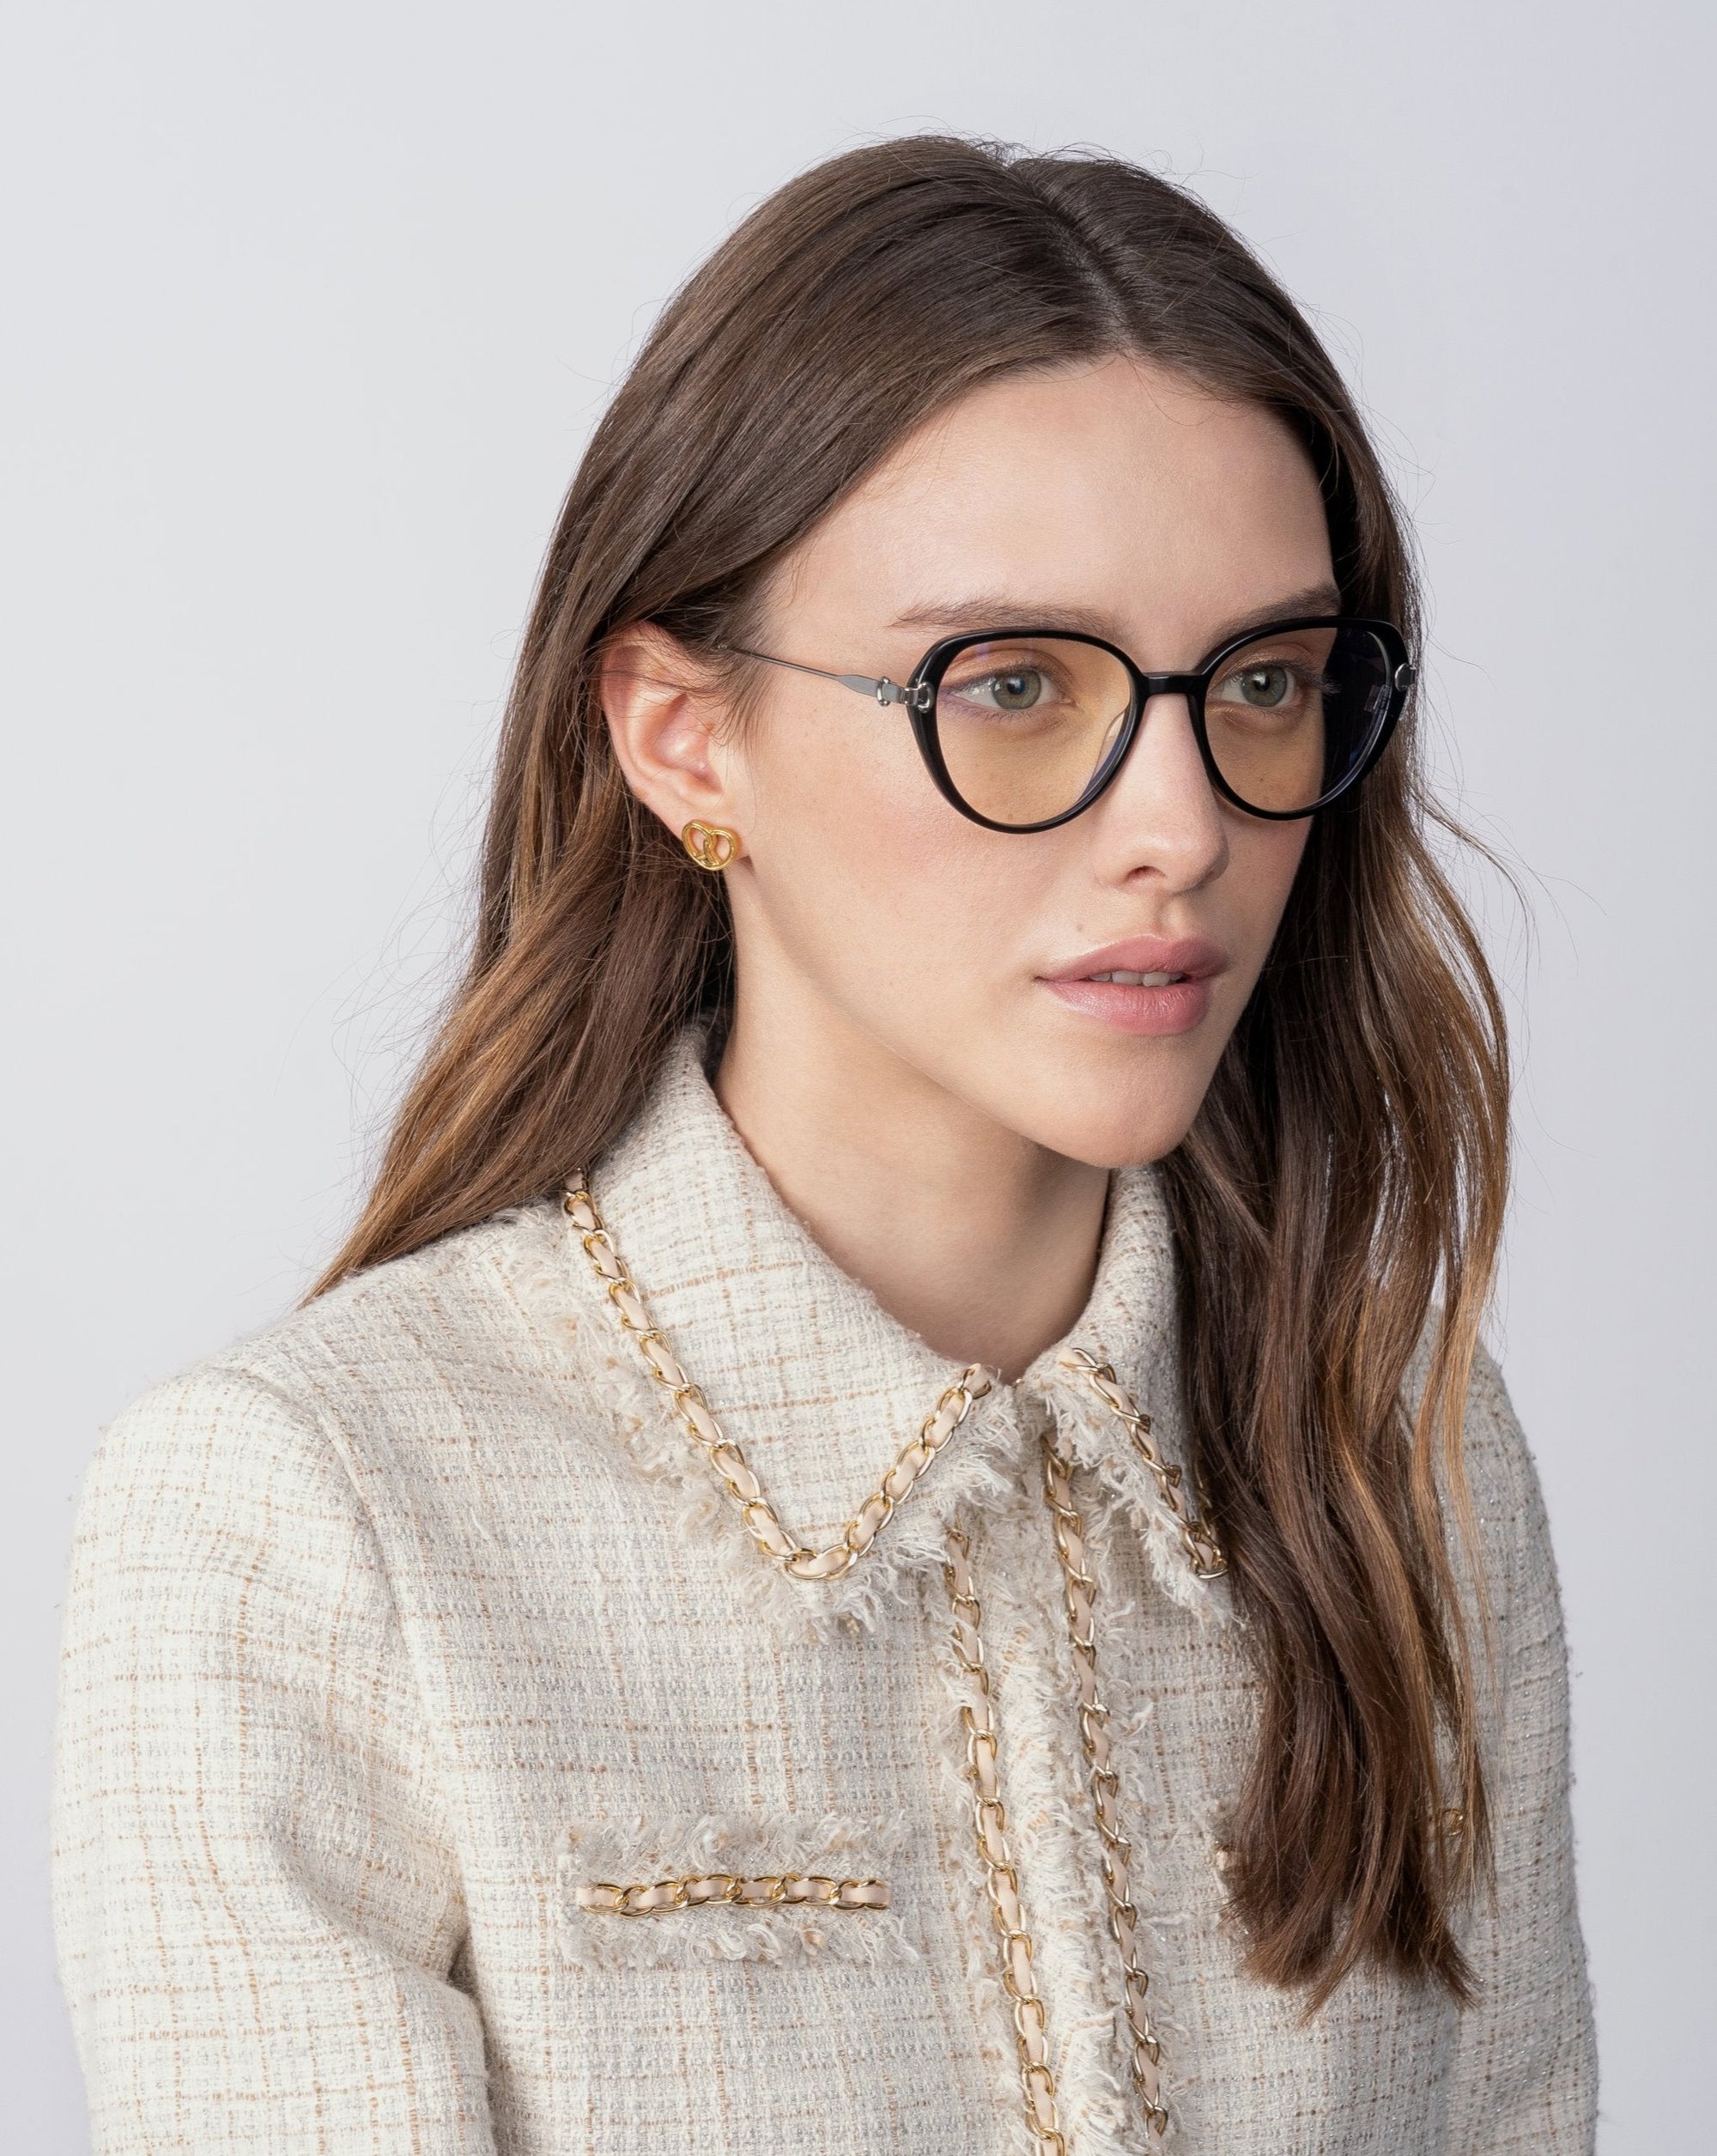 A woman with long, brown hair wearing For Art&#39;s Sake® Waterhouse glasses with prescription lenses and a beige textured jacket adorned with 18-karat gold-plated chain detailing. She has small gold stud earrings and is looking slightly to the side against a plain, light gray background.